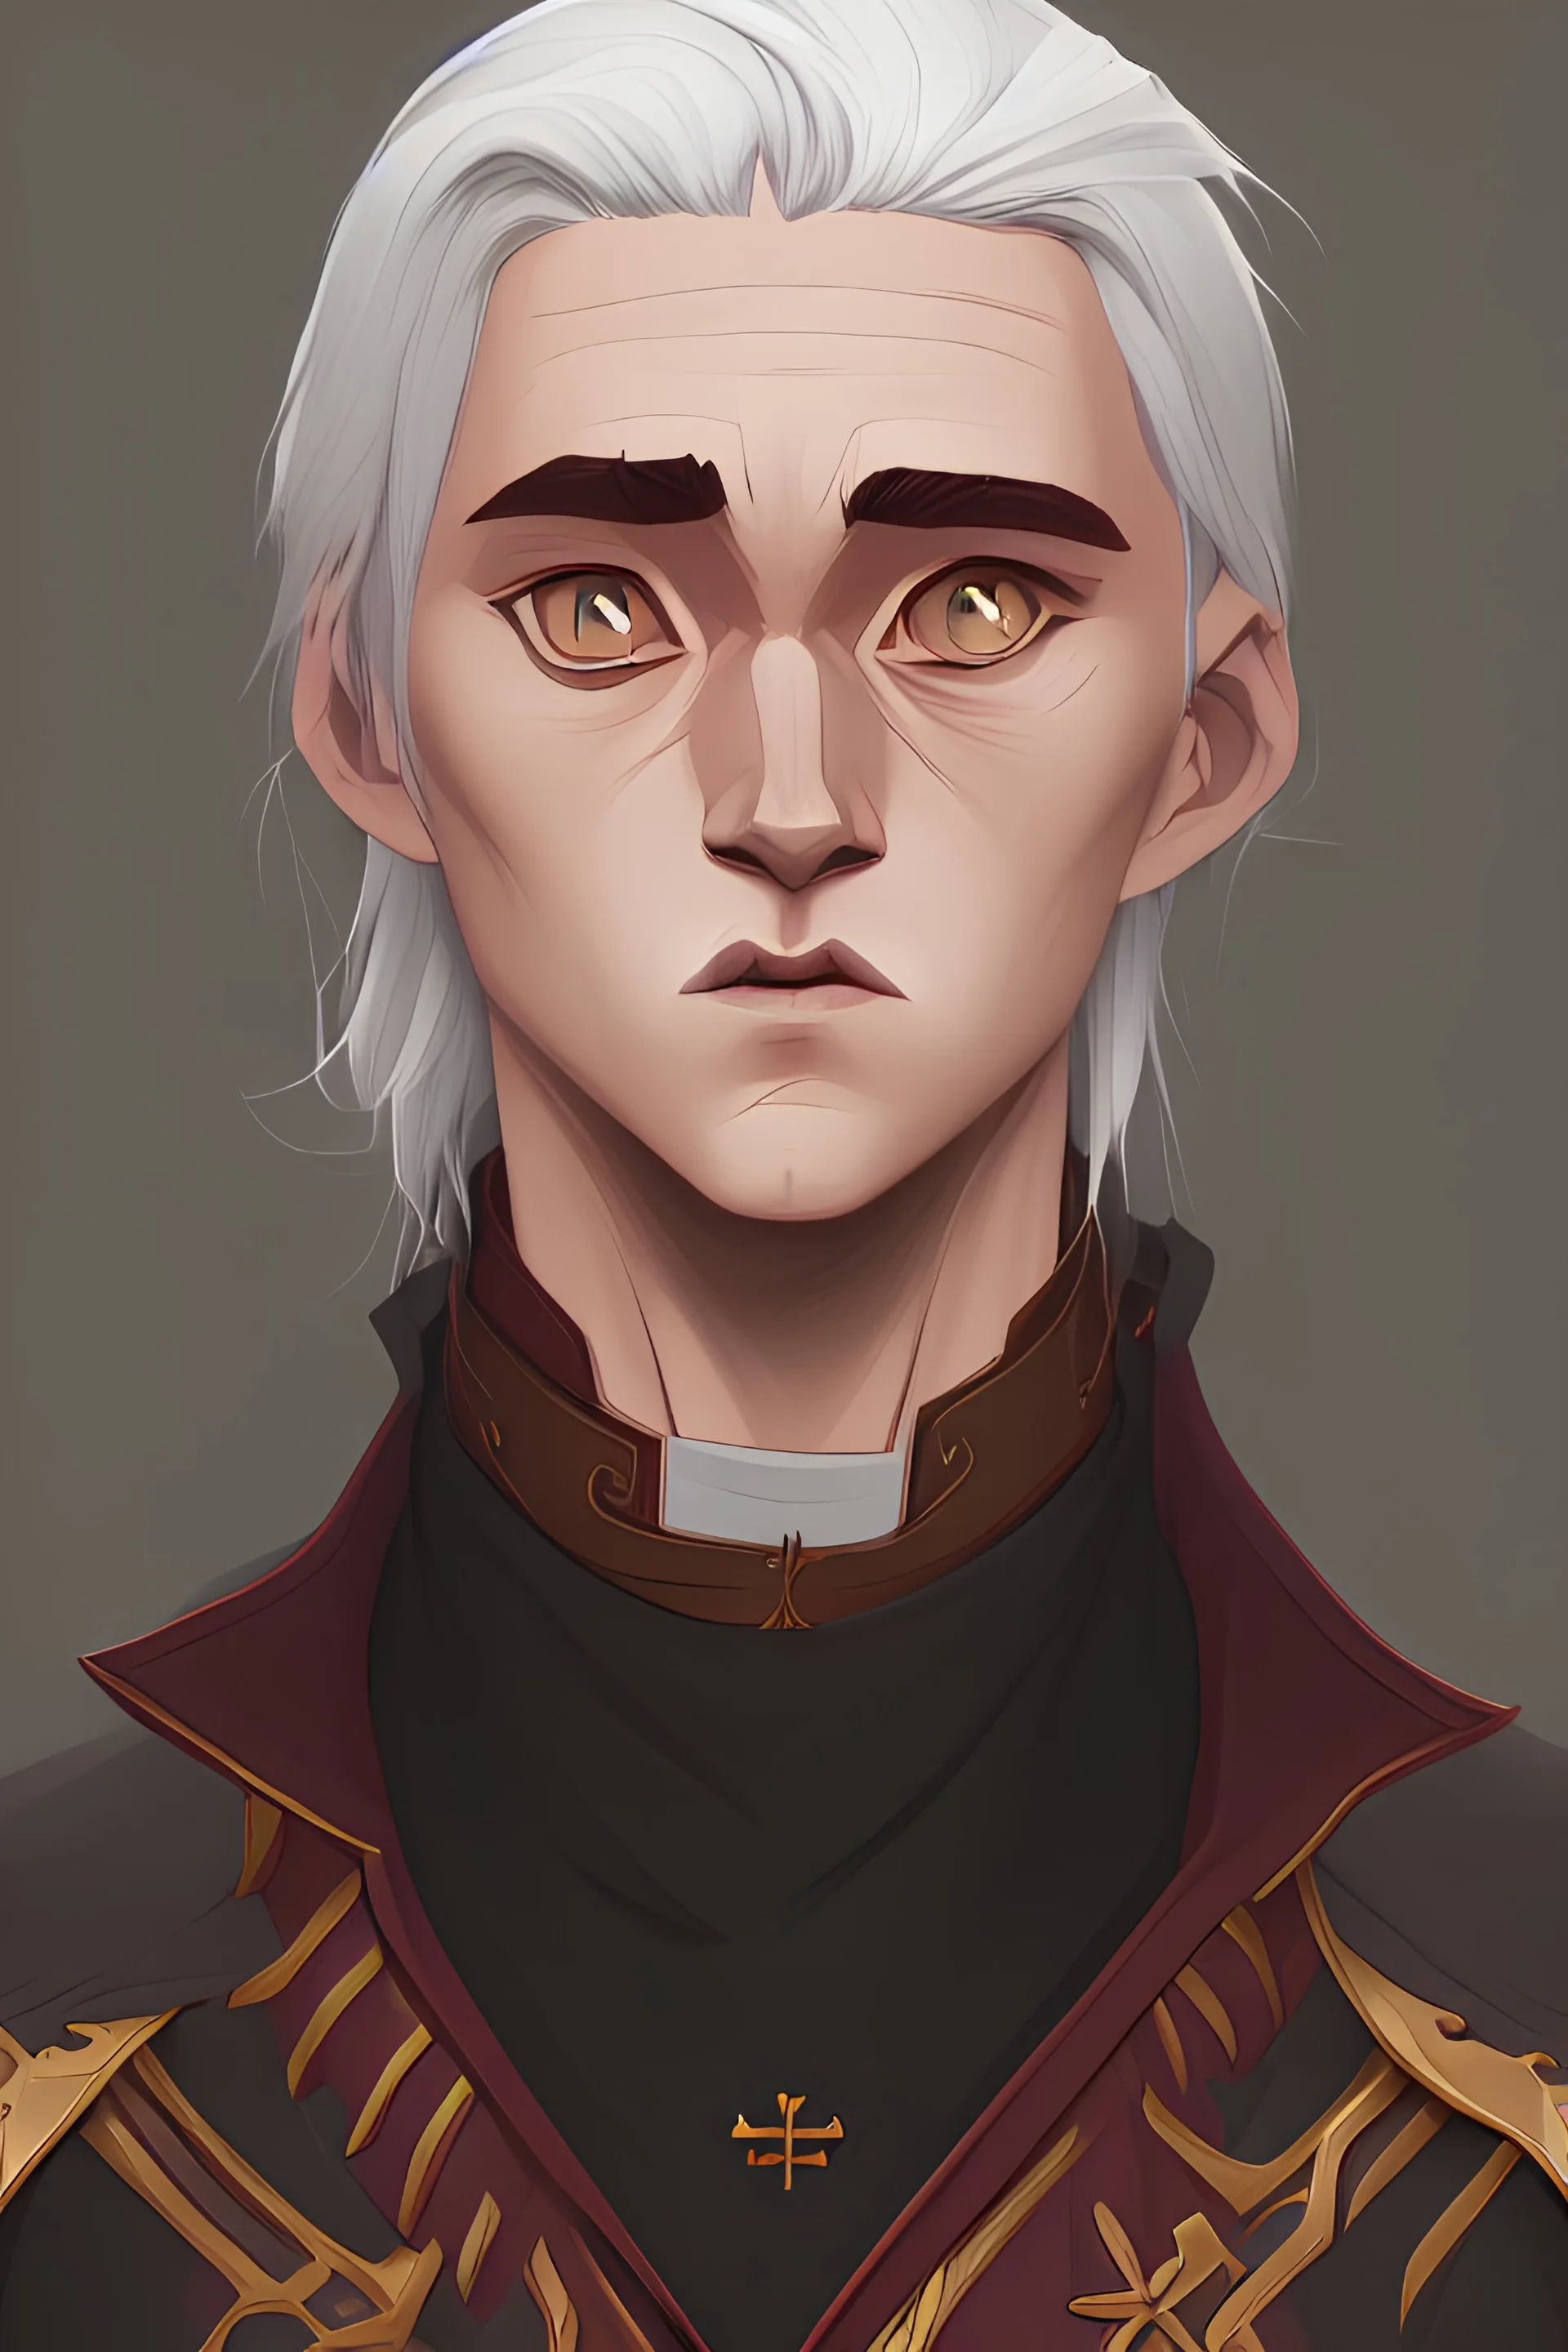 draw Aemond Targaryen from the House of the Dragon dressed as a Catholic priest